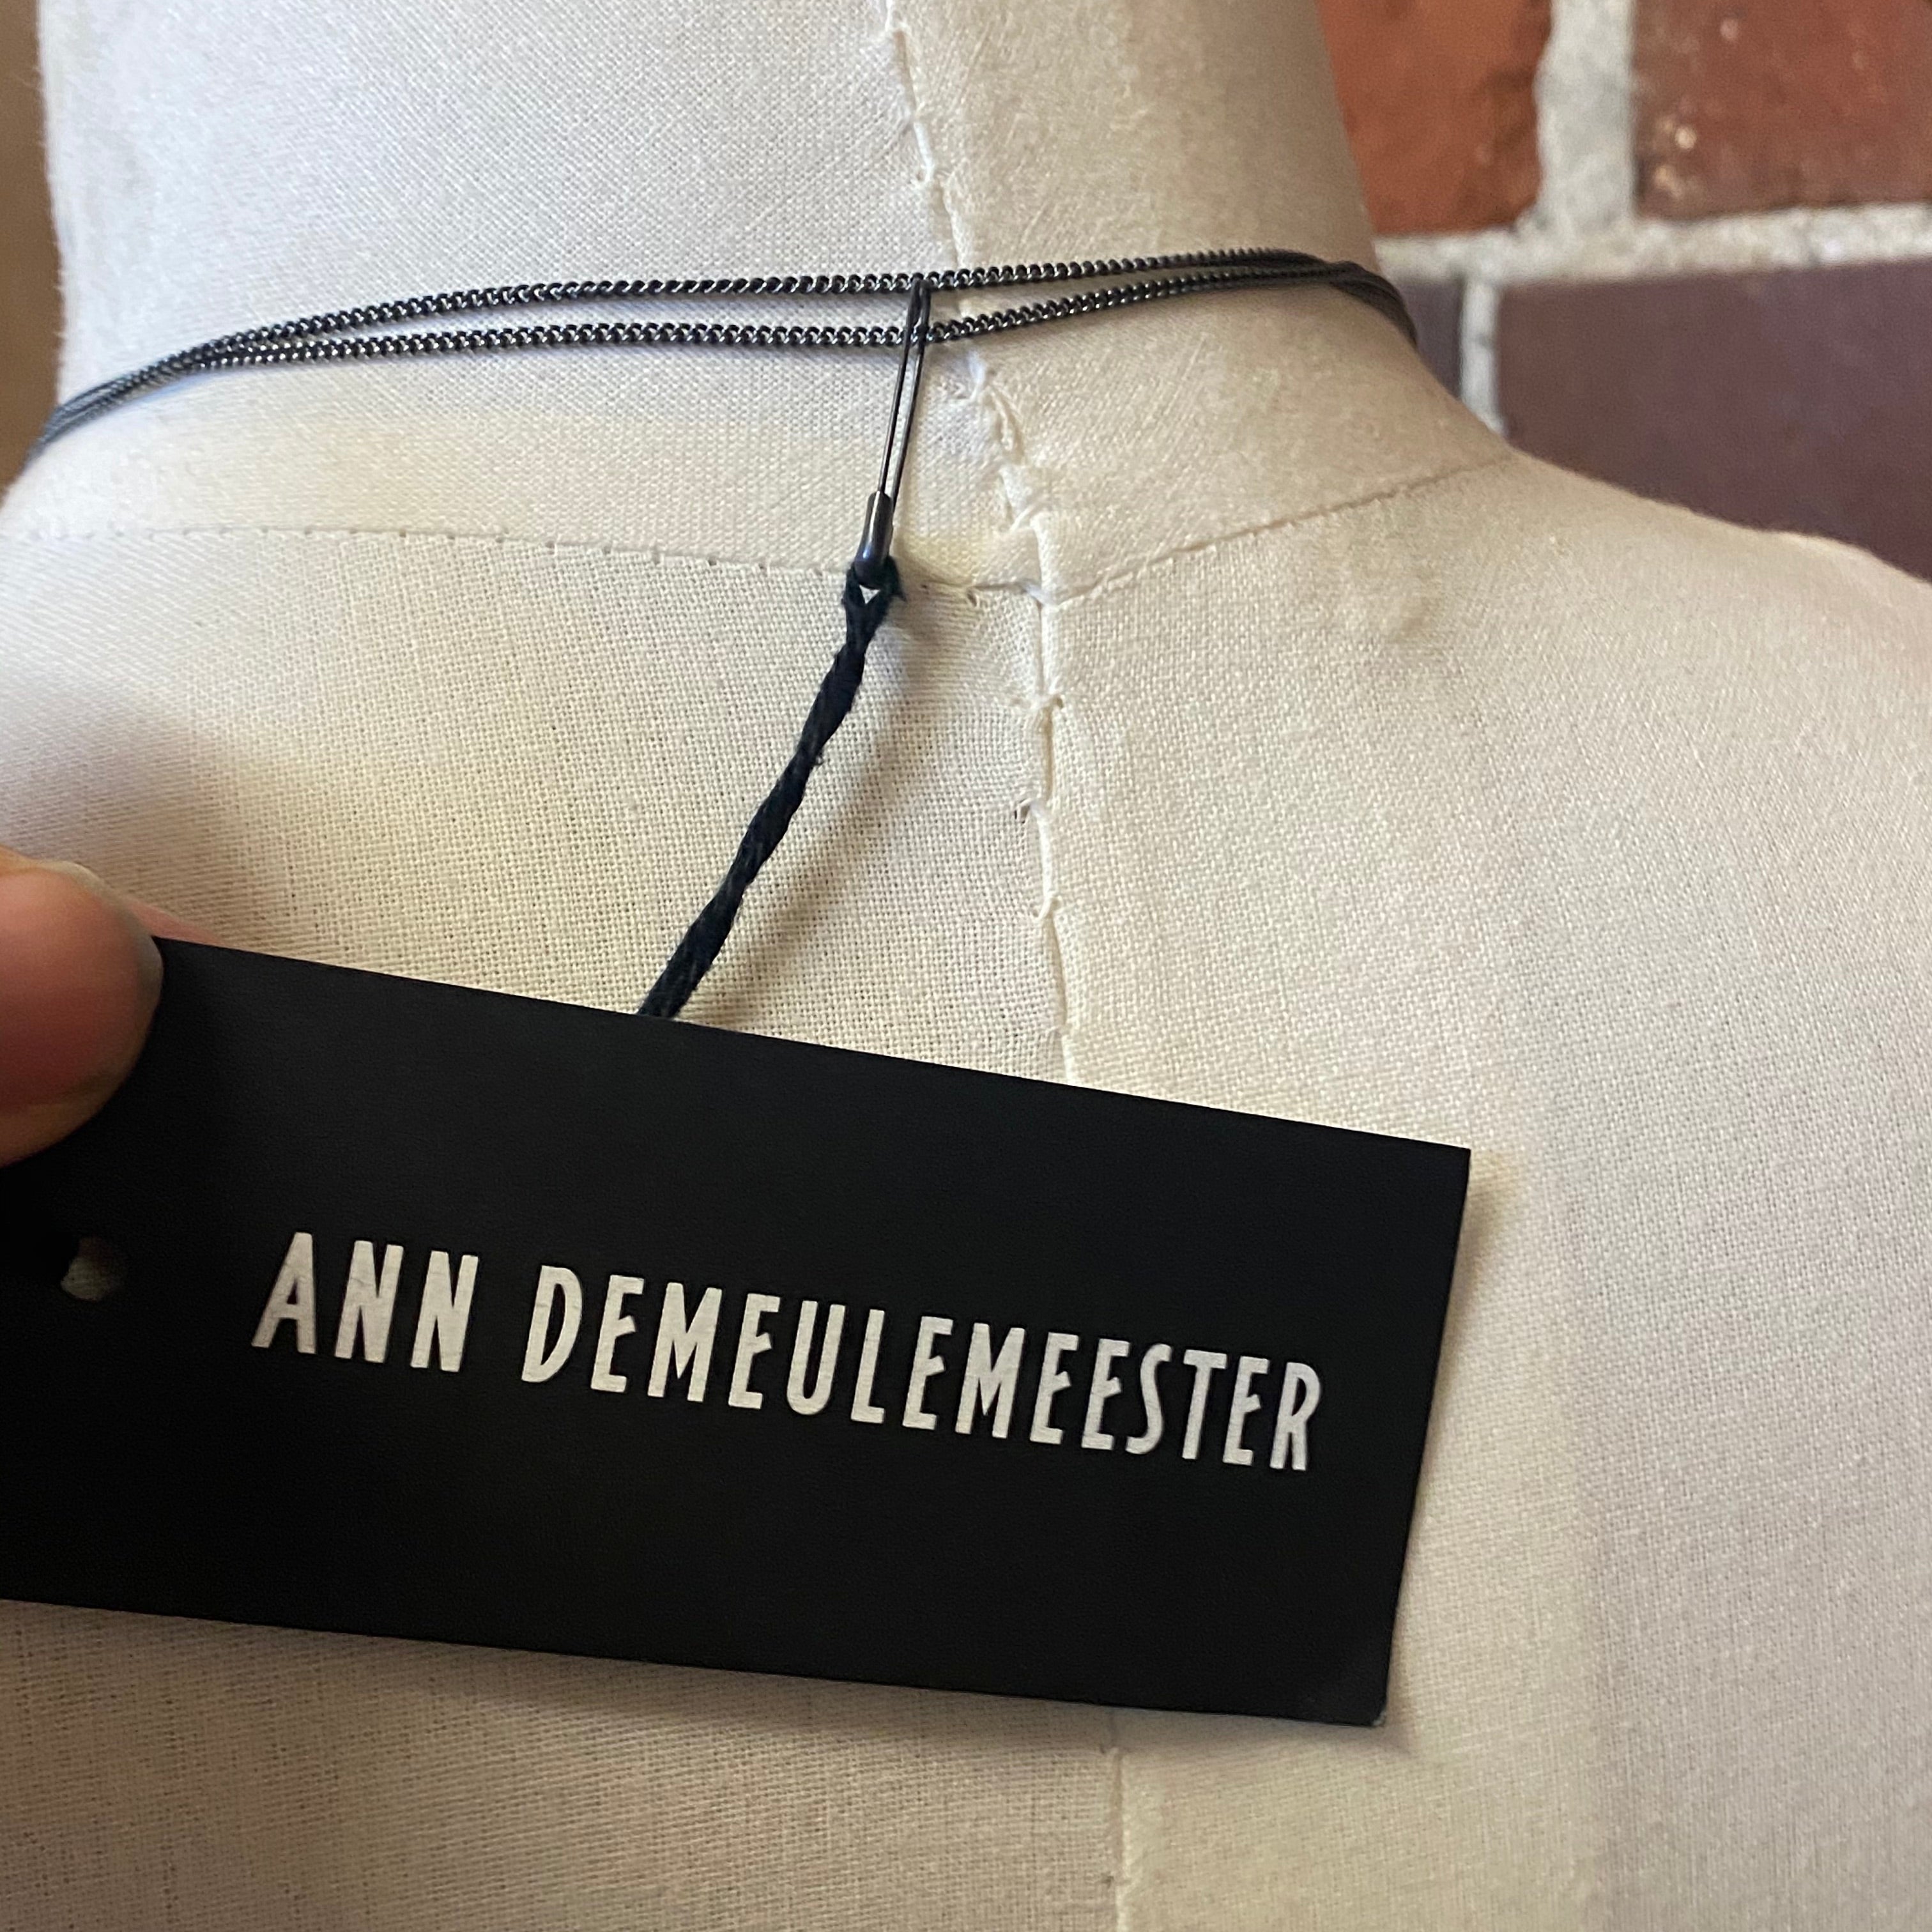 ANN DEMULEMEESTER nail necklace